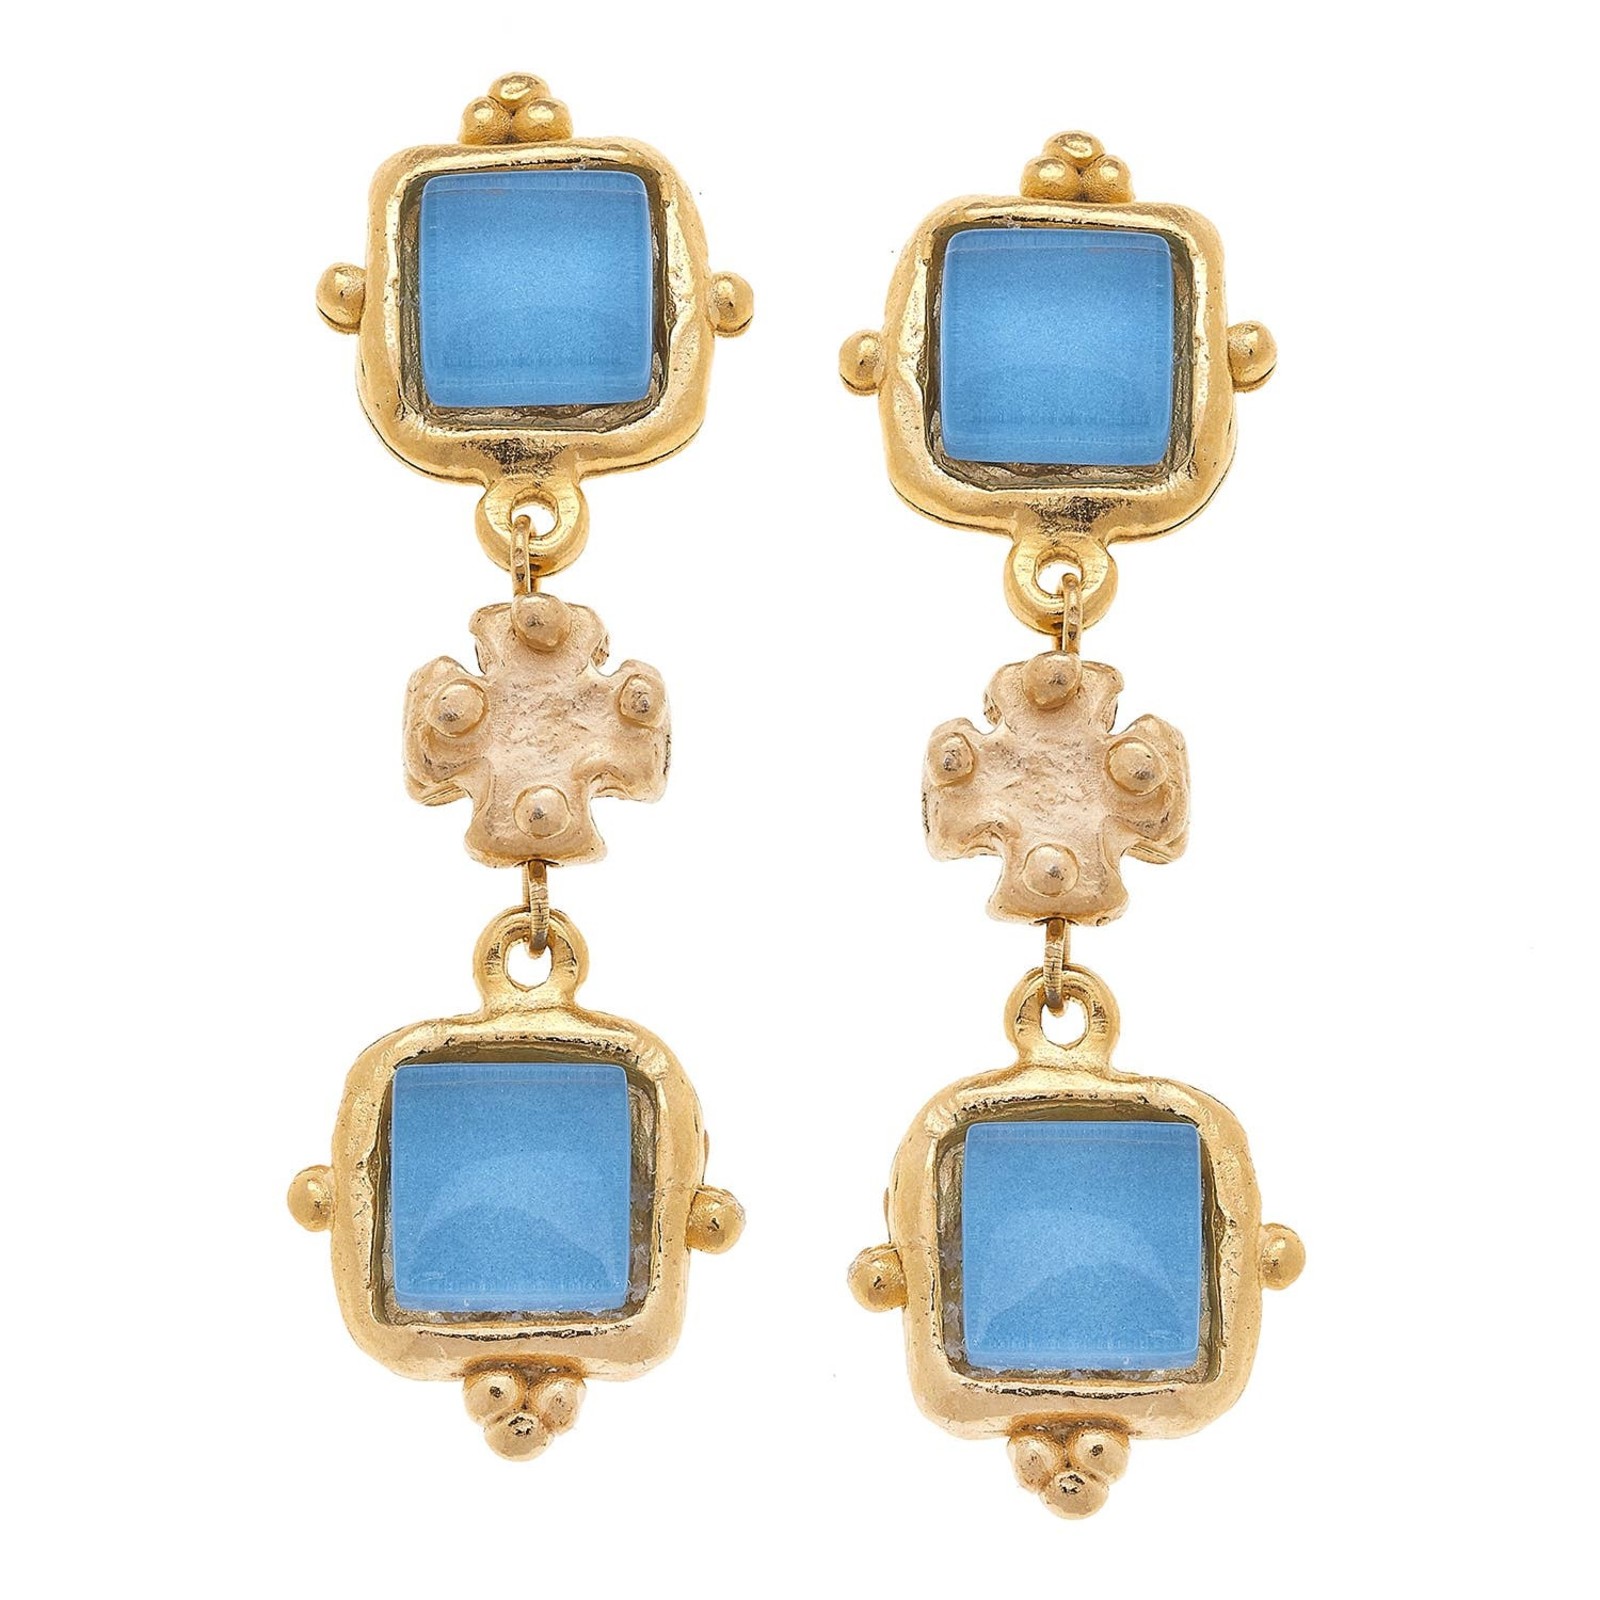 Susan Shaw Blue and Gold Earrings   1080aq loading=